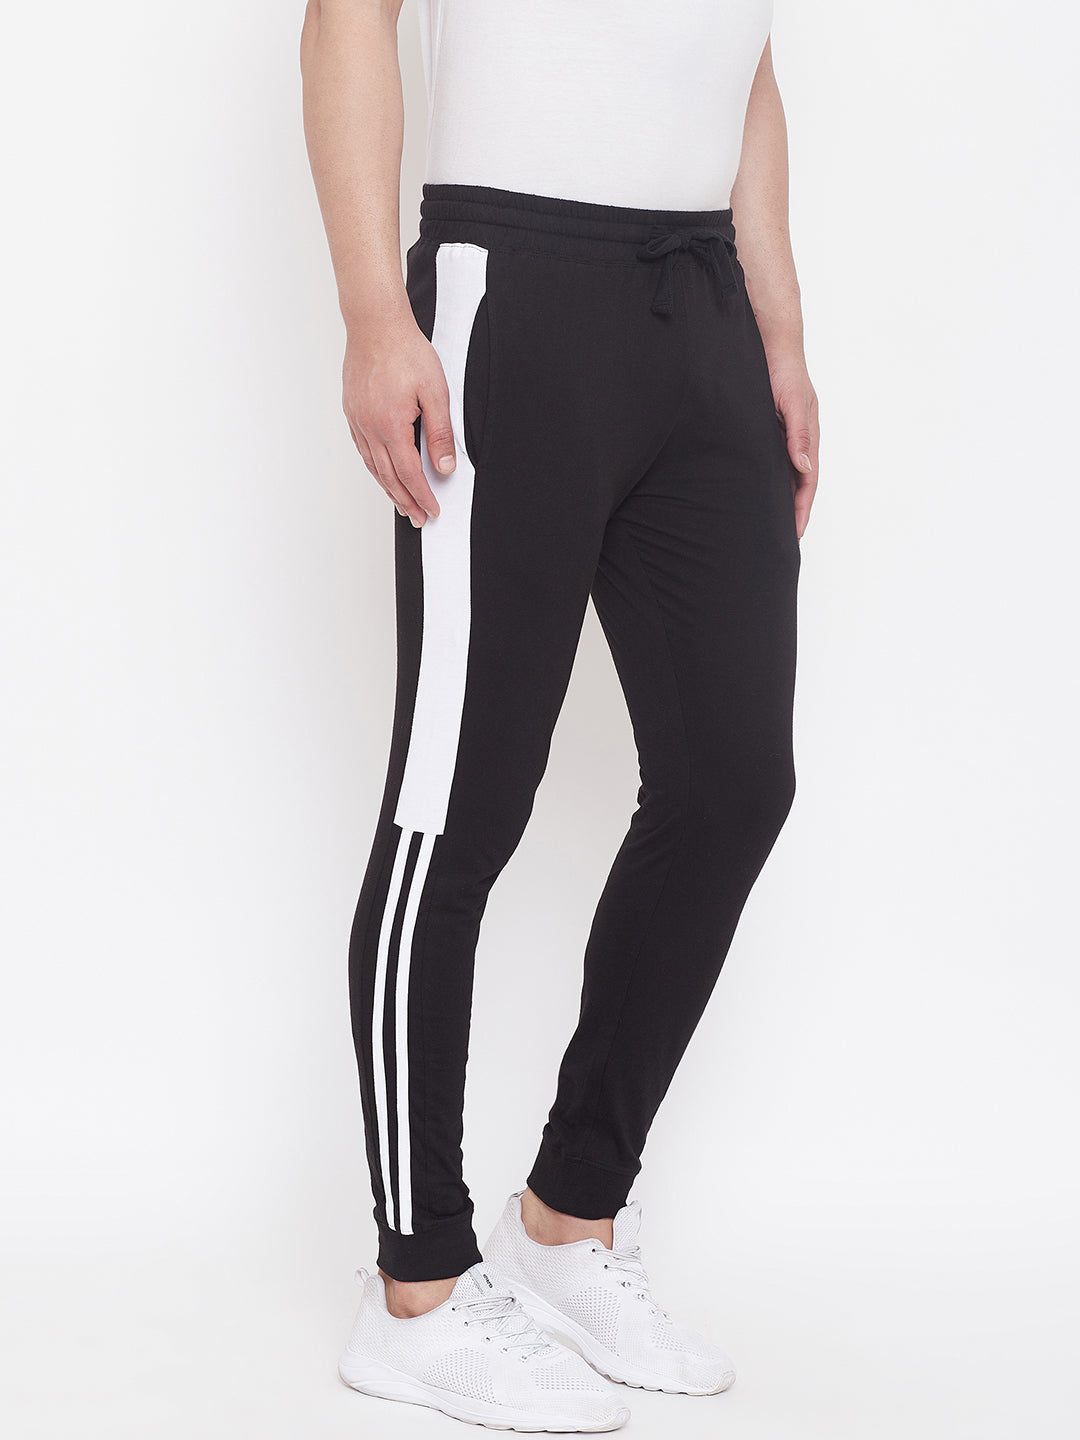 Black/White Mid - Rise Slim Fit Joggers With Color Block